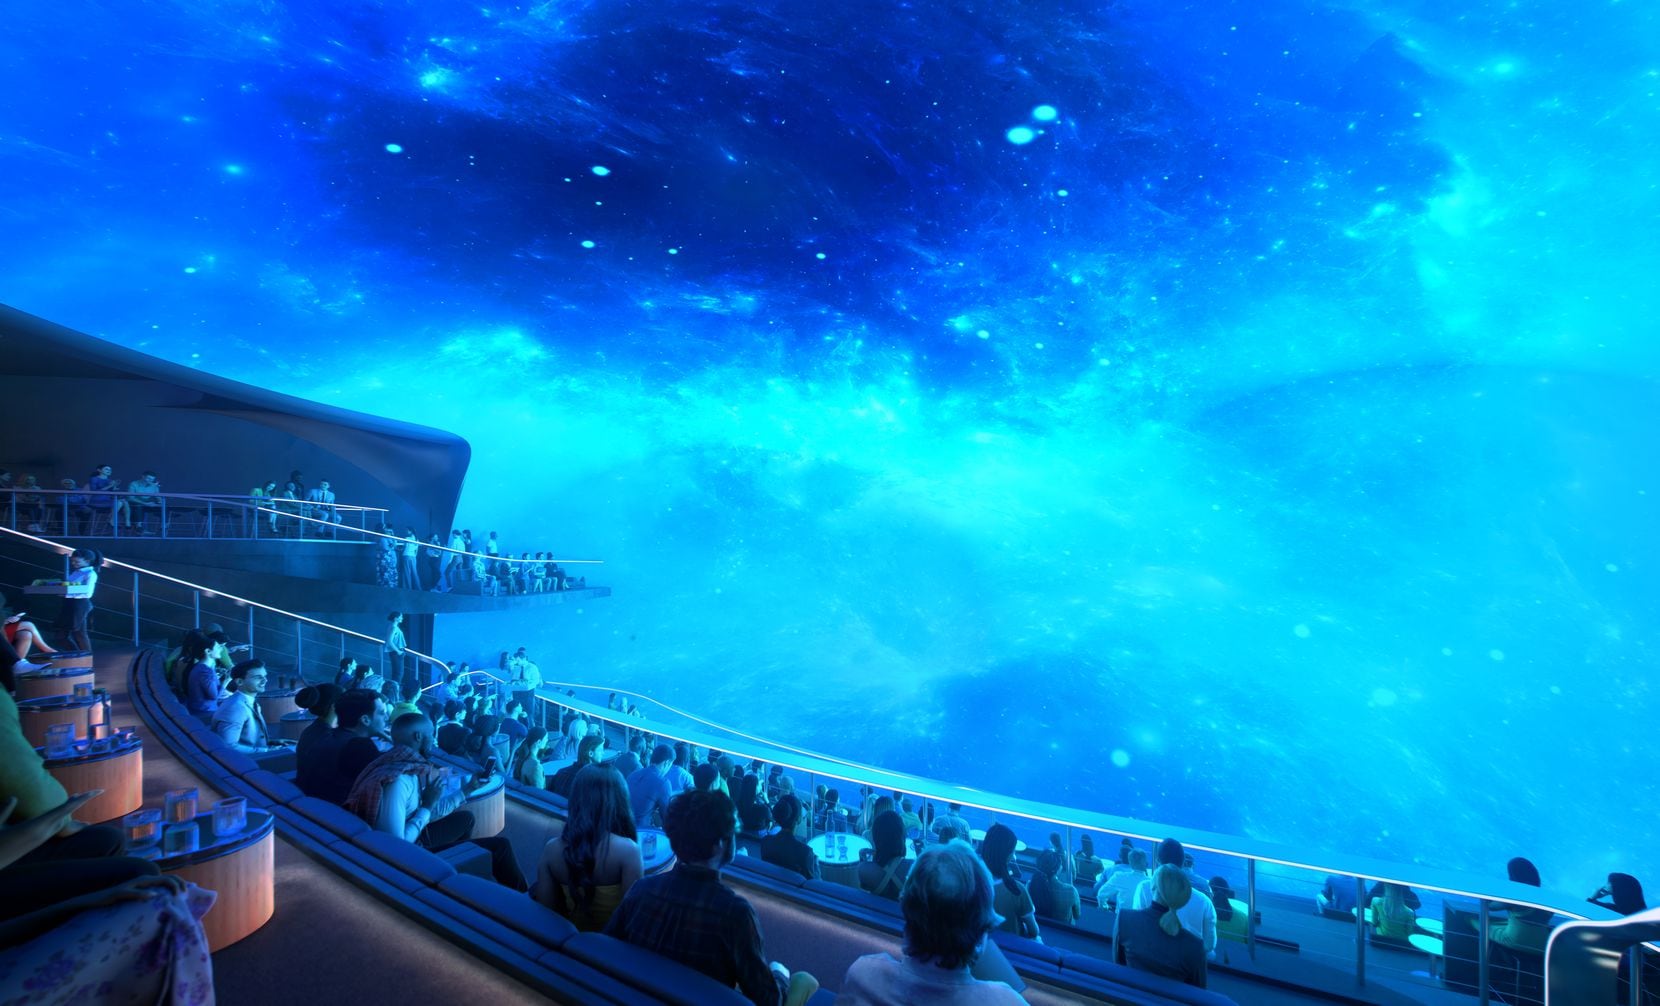 Cosm promises to create immersive experiences that will make customers feel like they are at…